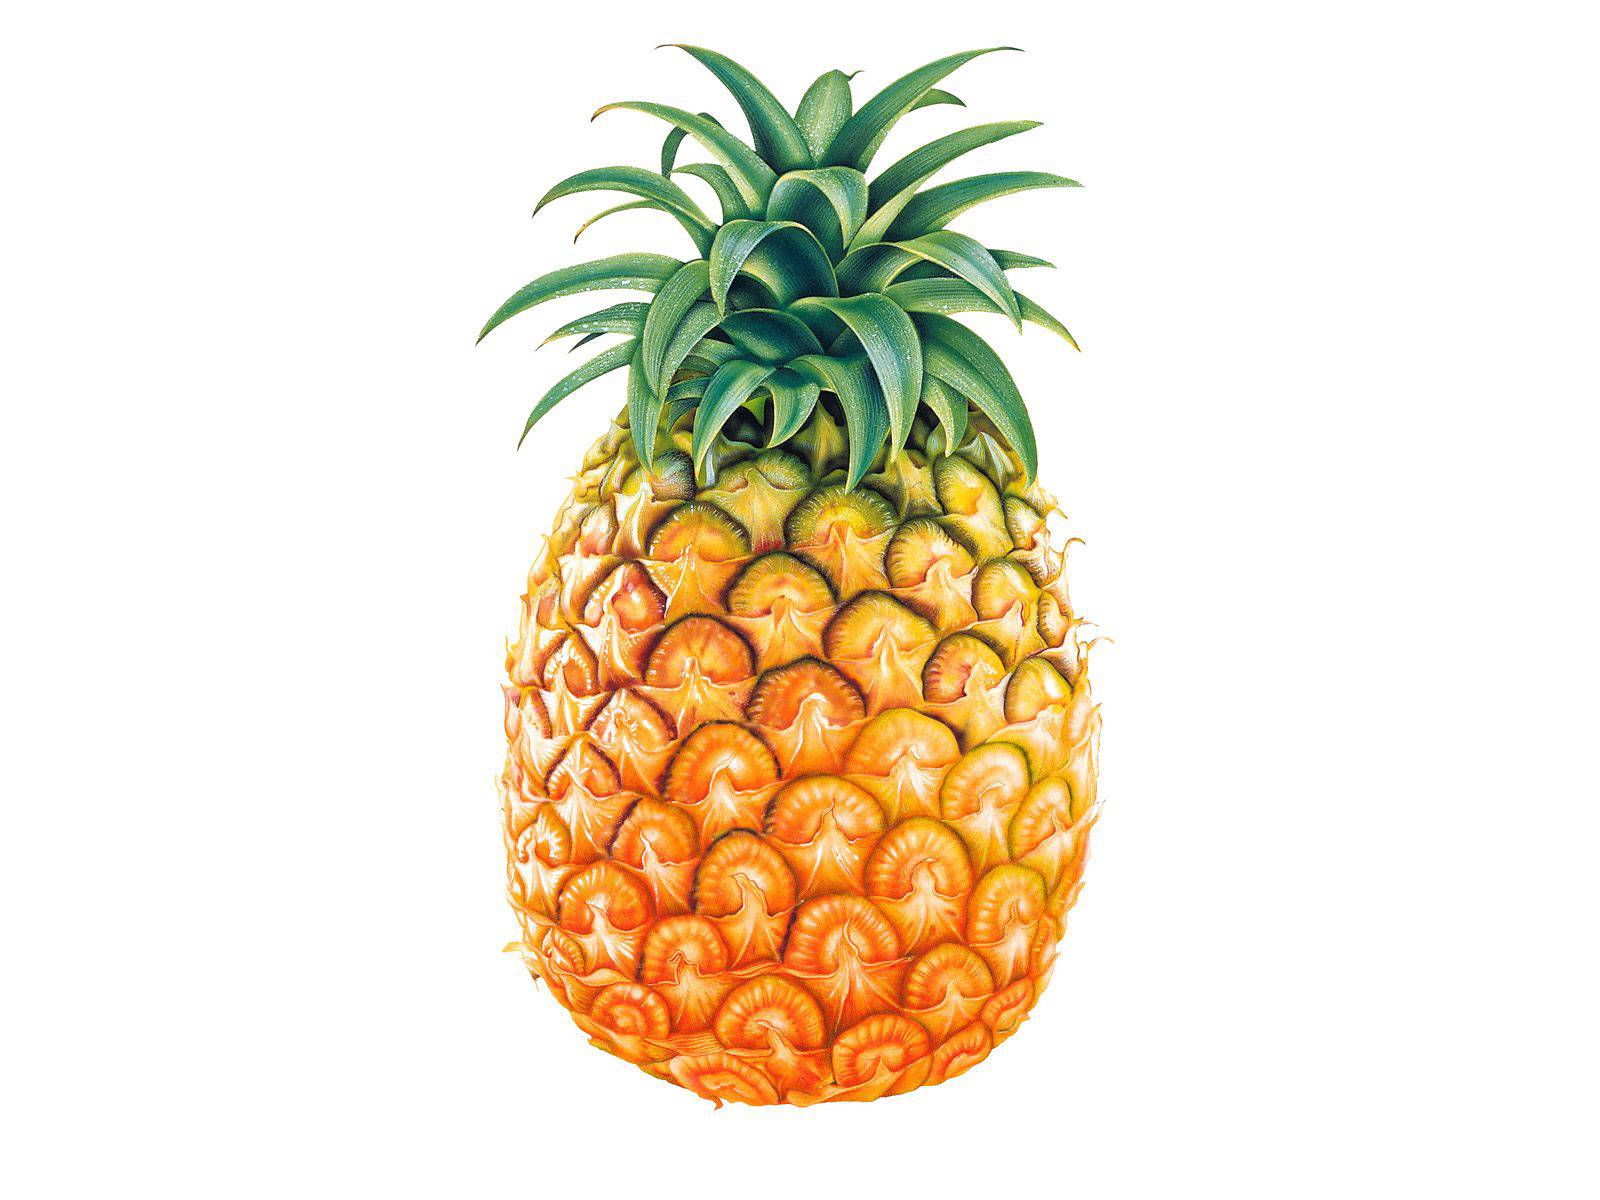 Pineapple Wallpaper Iphone Images Free Download Clipart